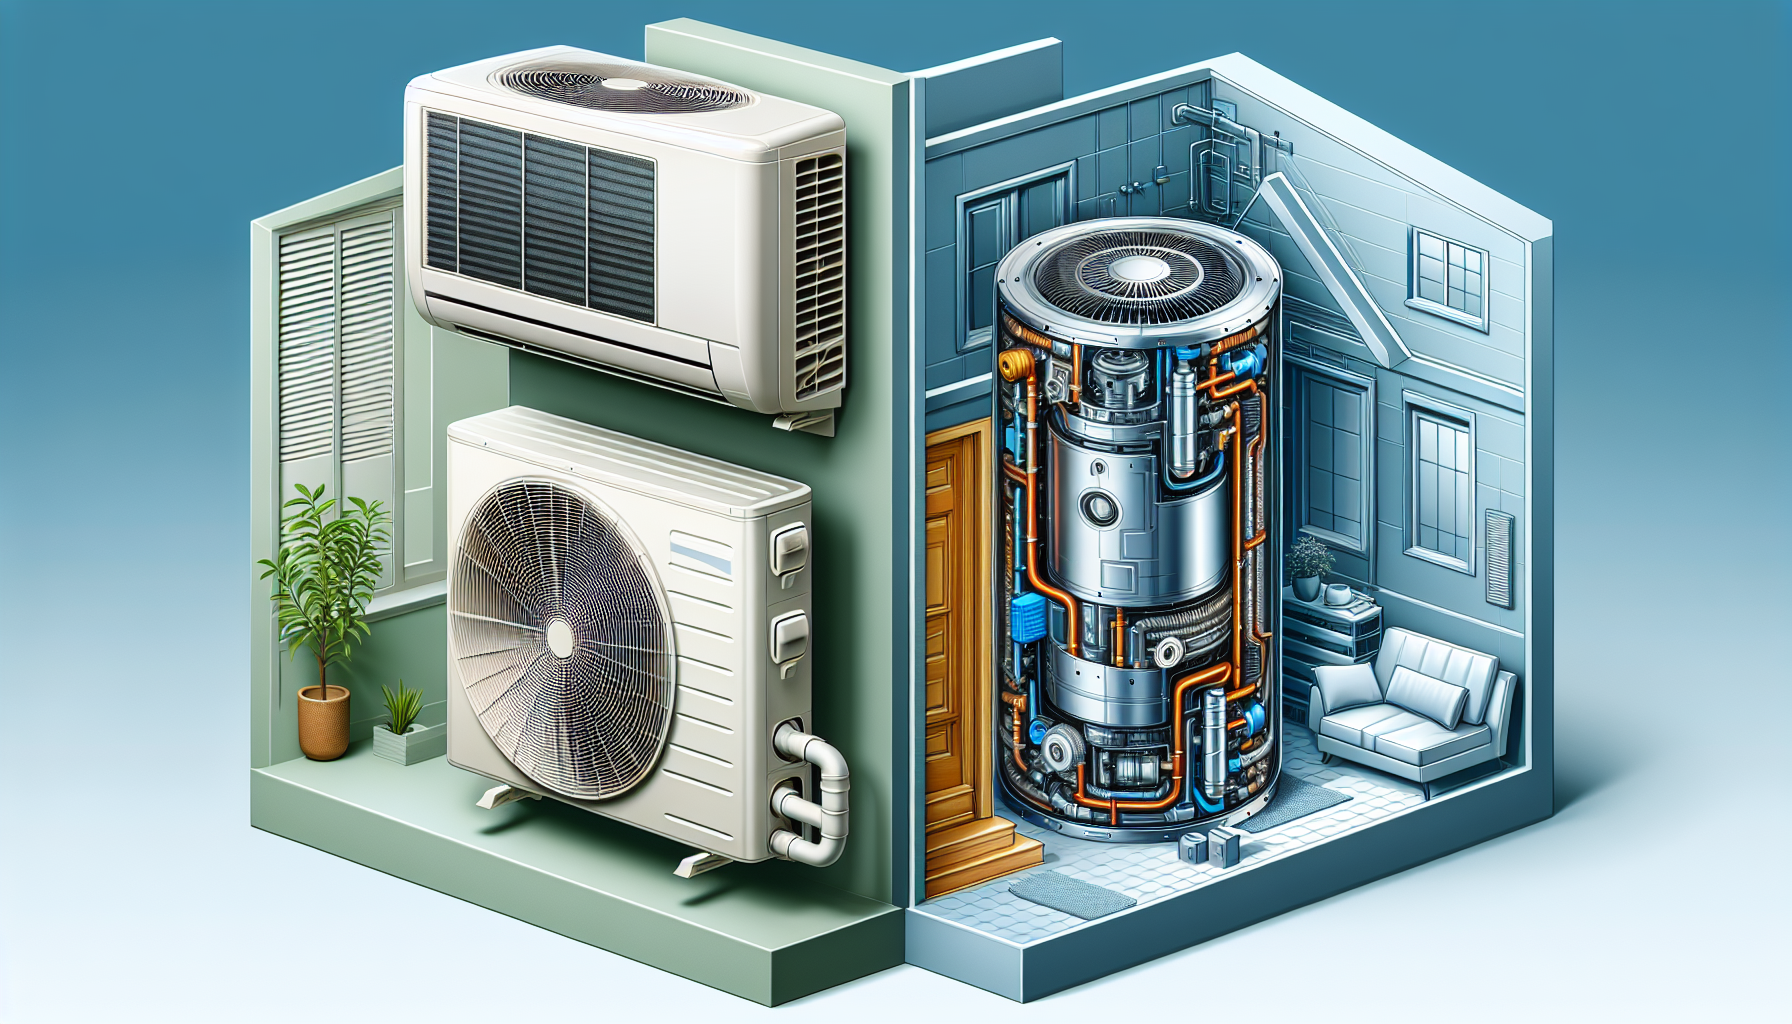 Illustration comparing split system air conditioner and integrated heat pump systems